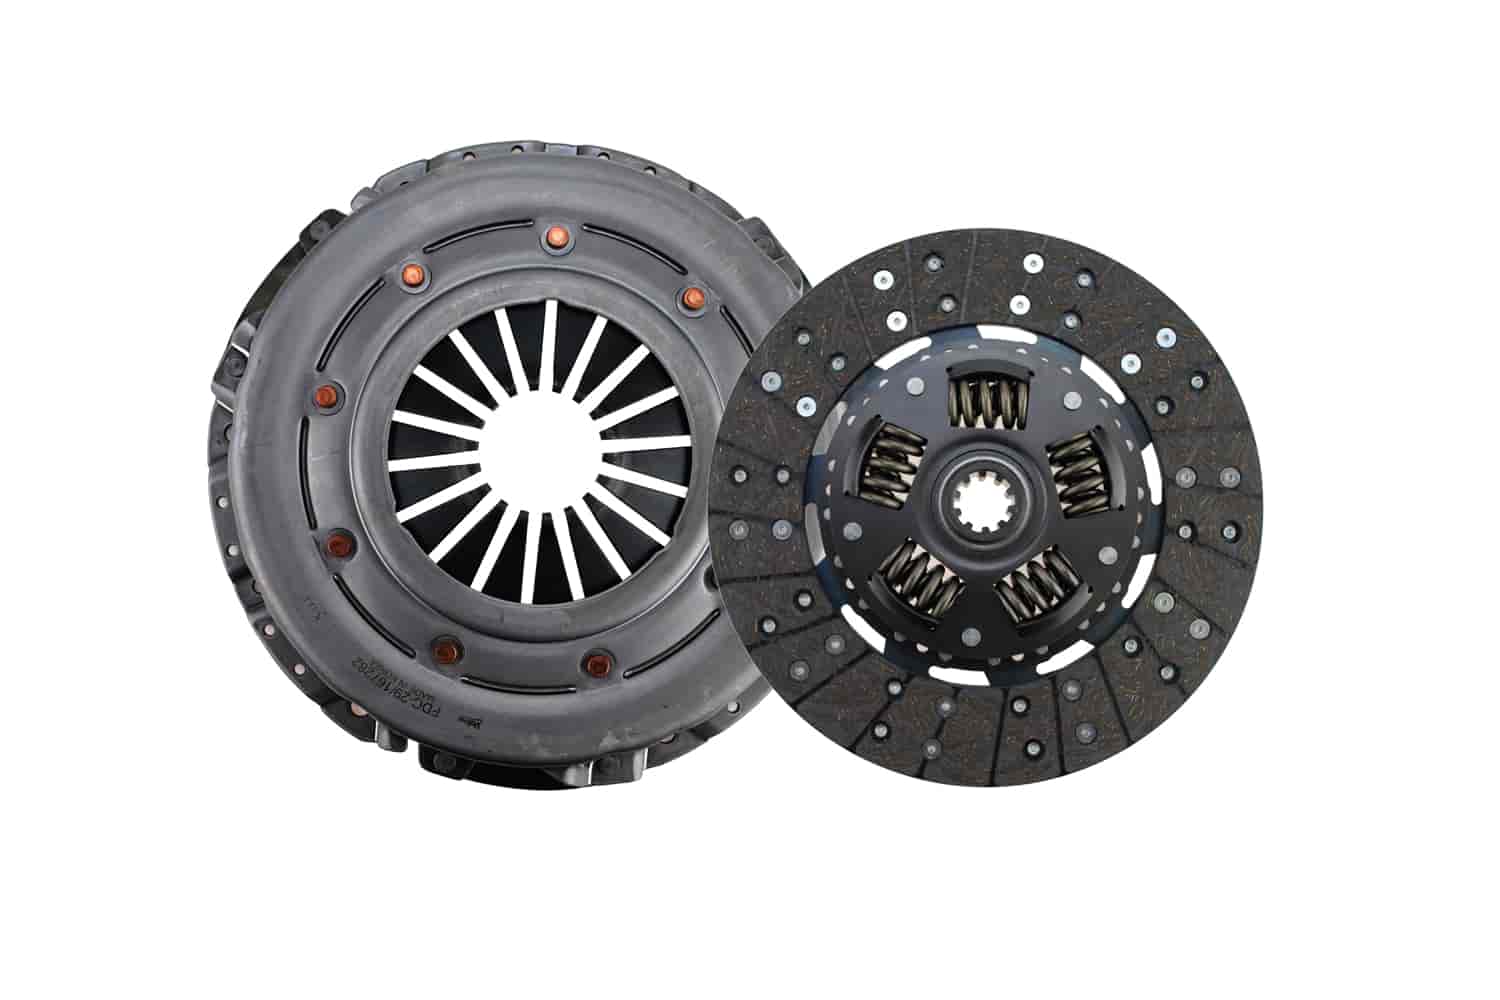 Premium OEM Replacement Clutch Kit 1986-2000 Ford Mustang